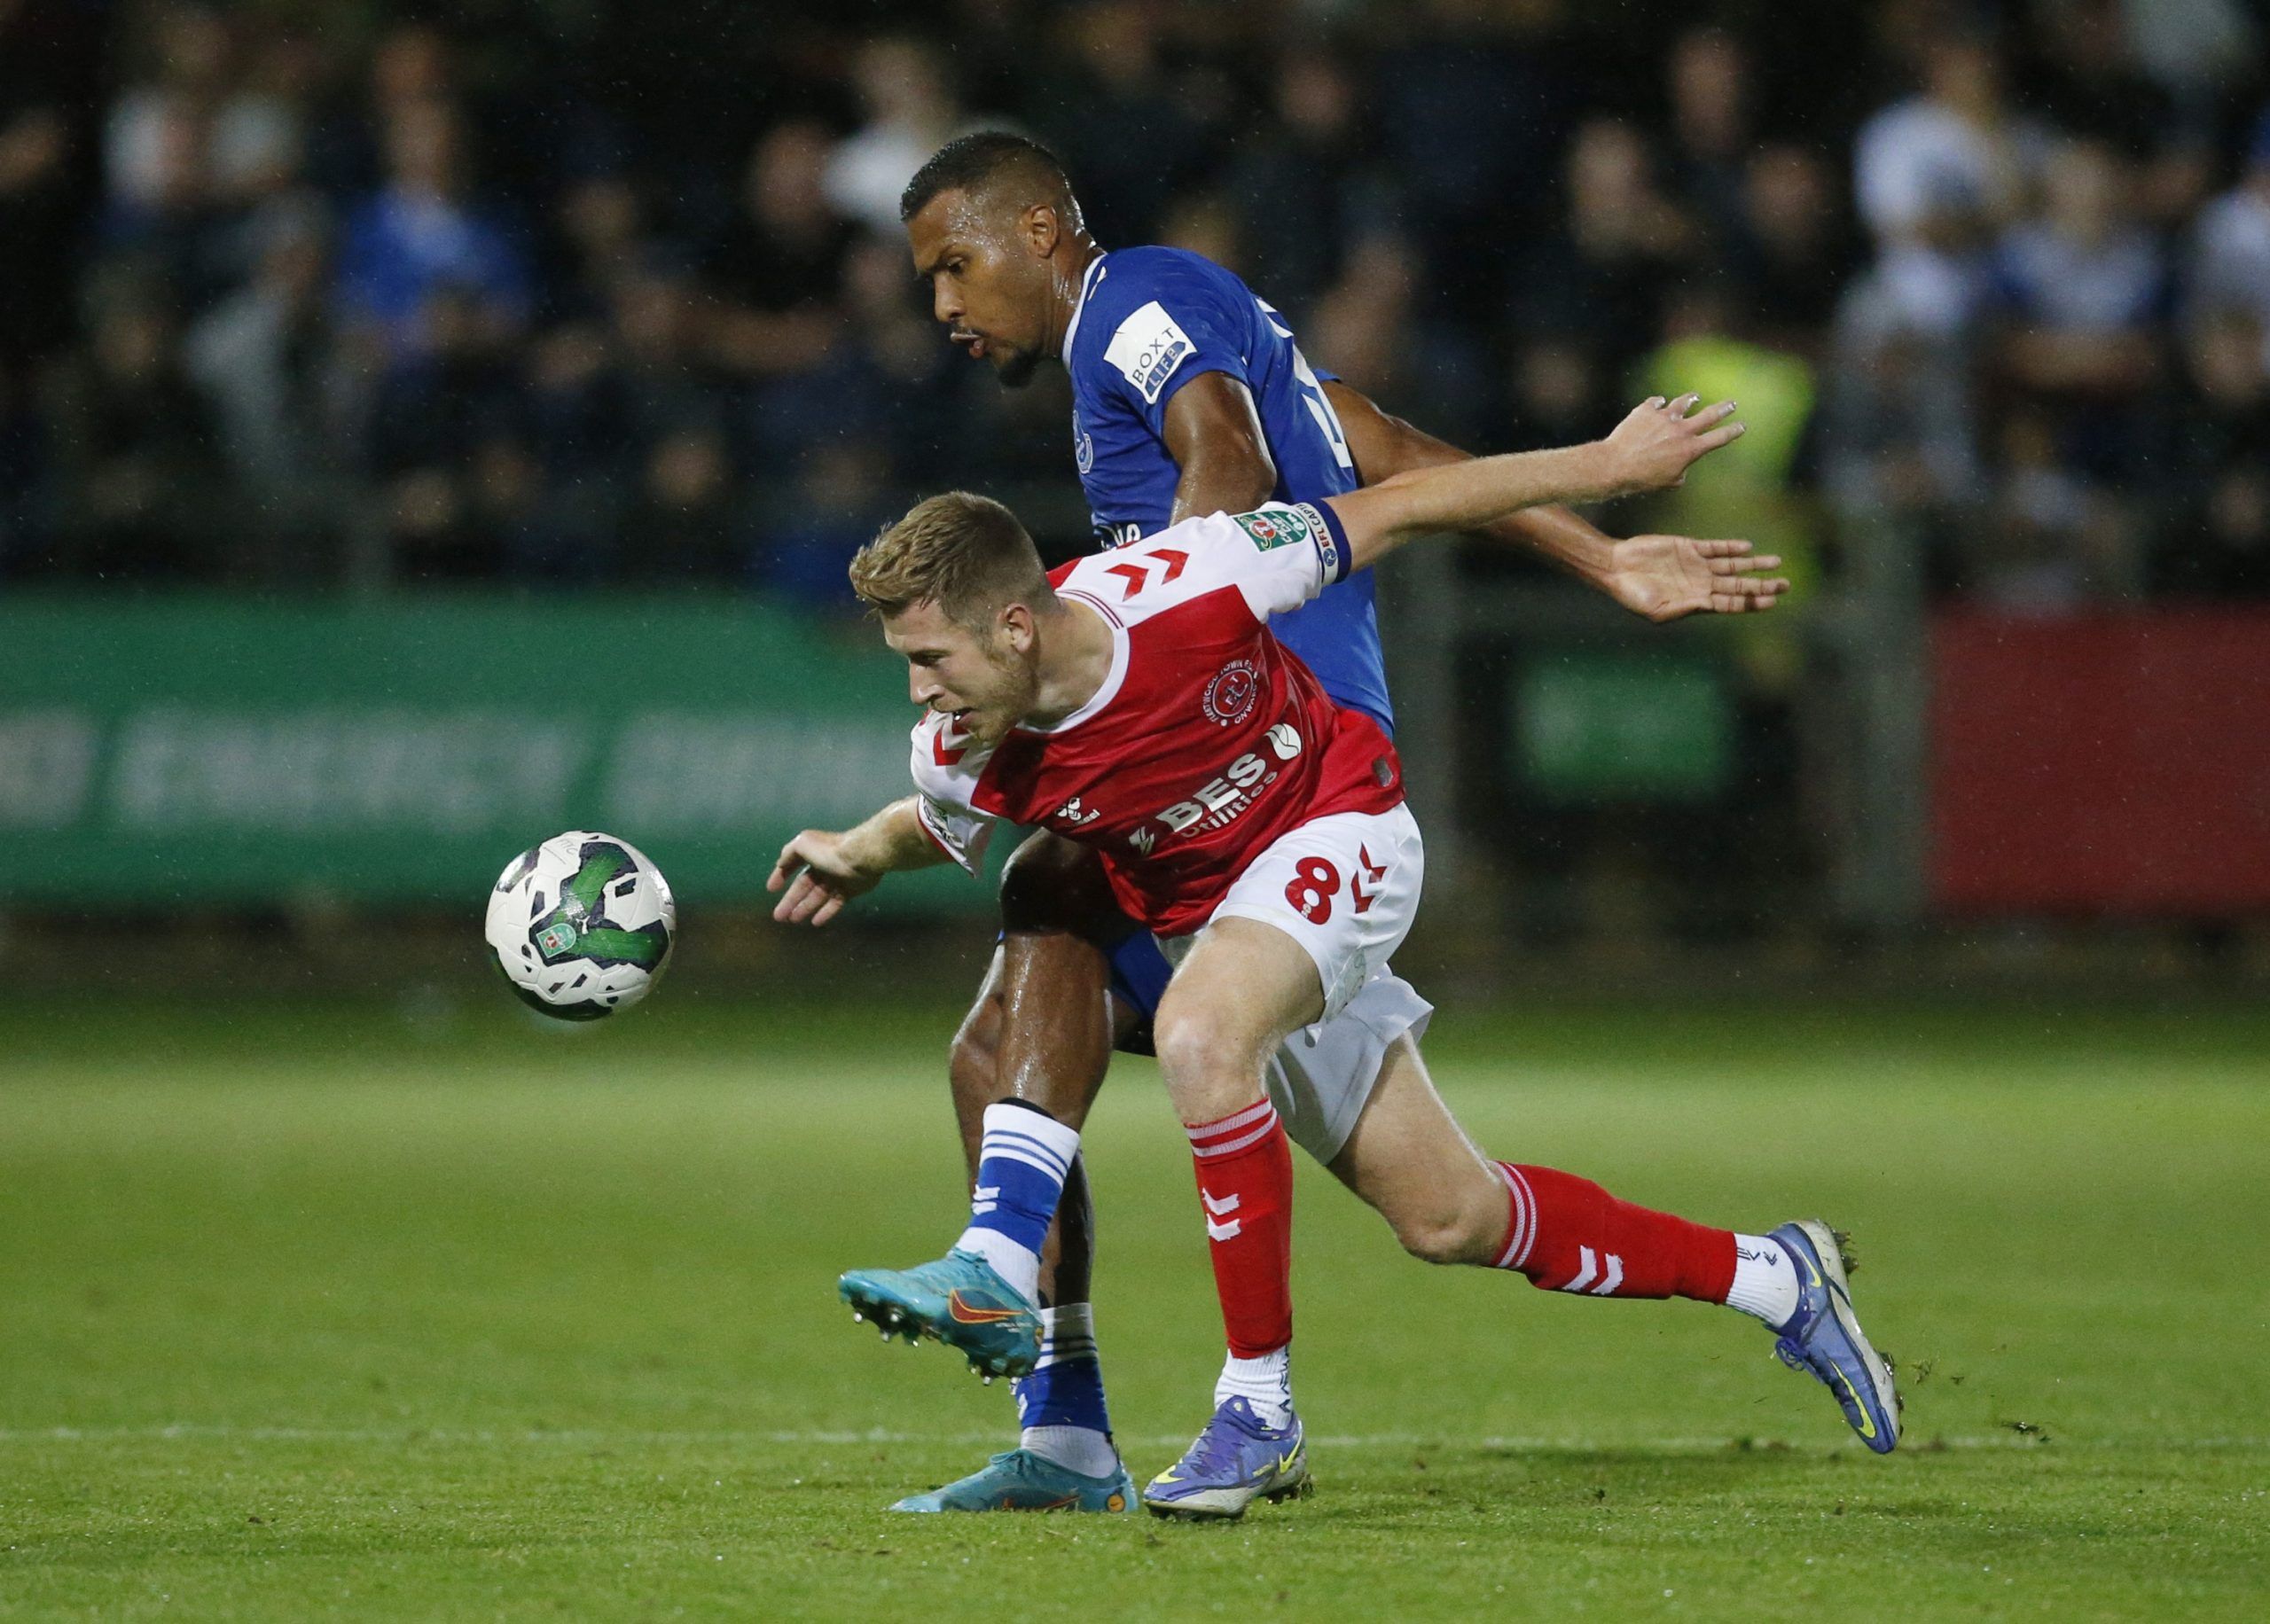 Soccer Football - Carabao Cup Second Round - Fleetwood Town v Everton - Highbury Stadium, Fleetwood, Britain - August 23, 2022 Everton's Salomon Rondon in action with Fleetwood Town's Joshua Vela Action Images via Reuters/Ed Sykes EDITORIAL USE ONLY. No use with unauthorized audio, video, data, fixture lists, club/league logos or 'live' services. Online in-match use limited to 75 images, no video emulation. No use in betting, games or single club /league/player publications.  Please contact your